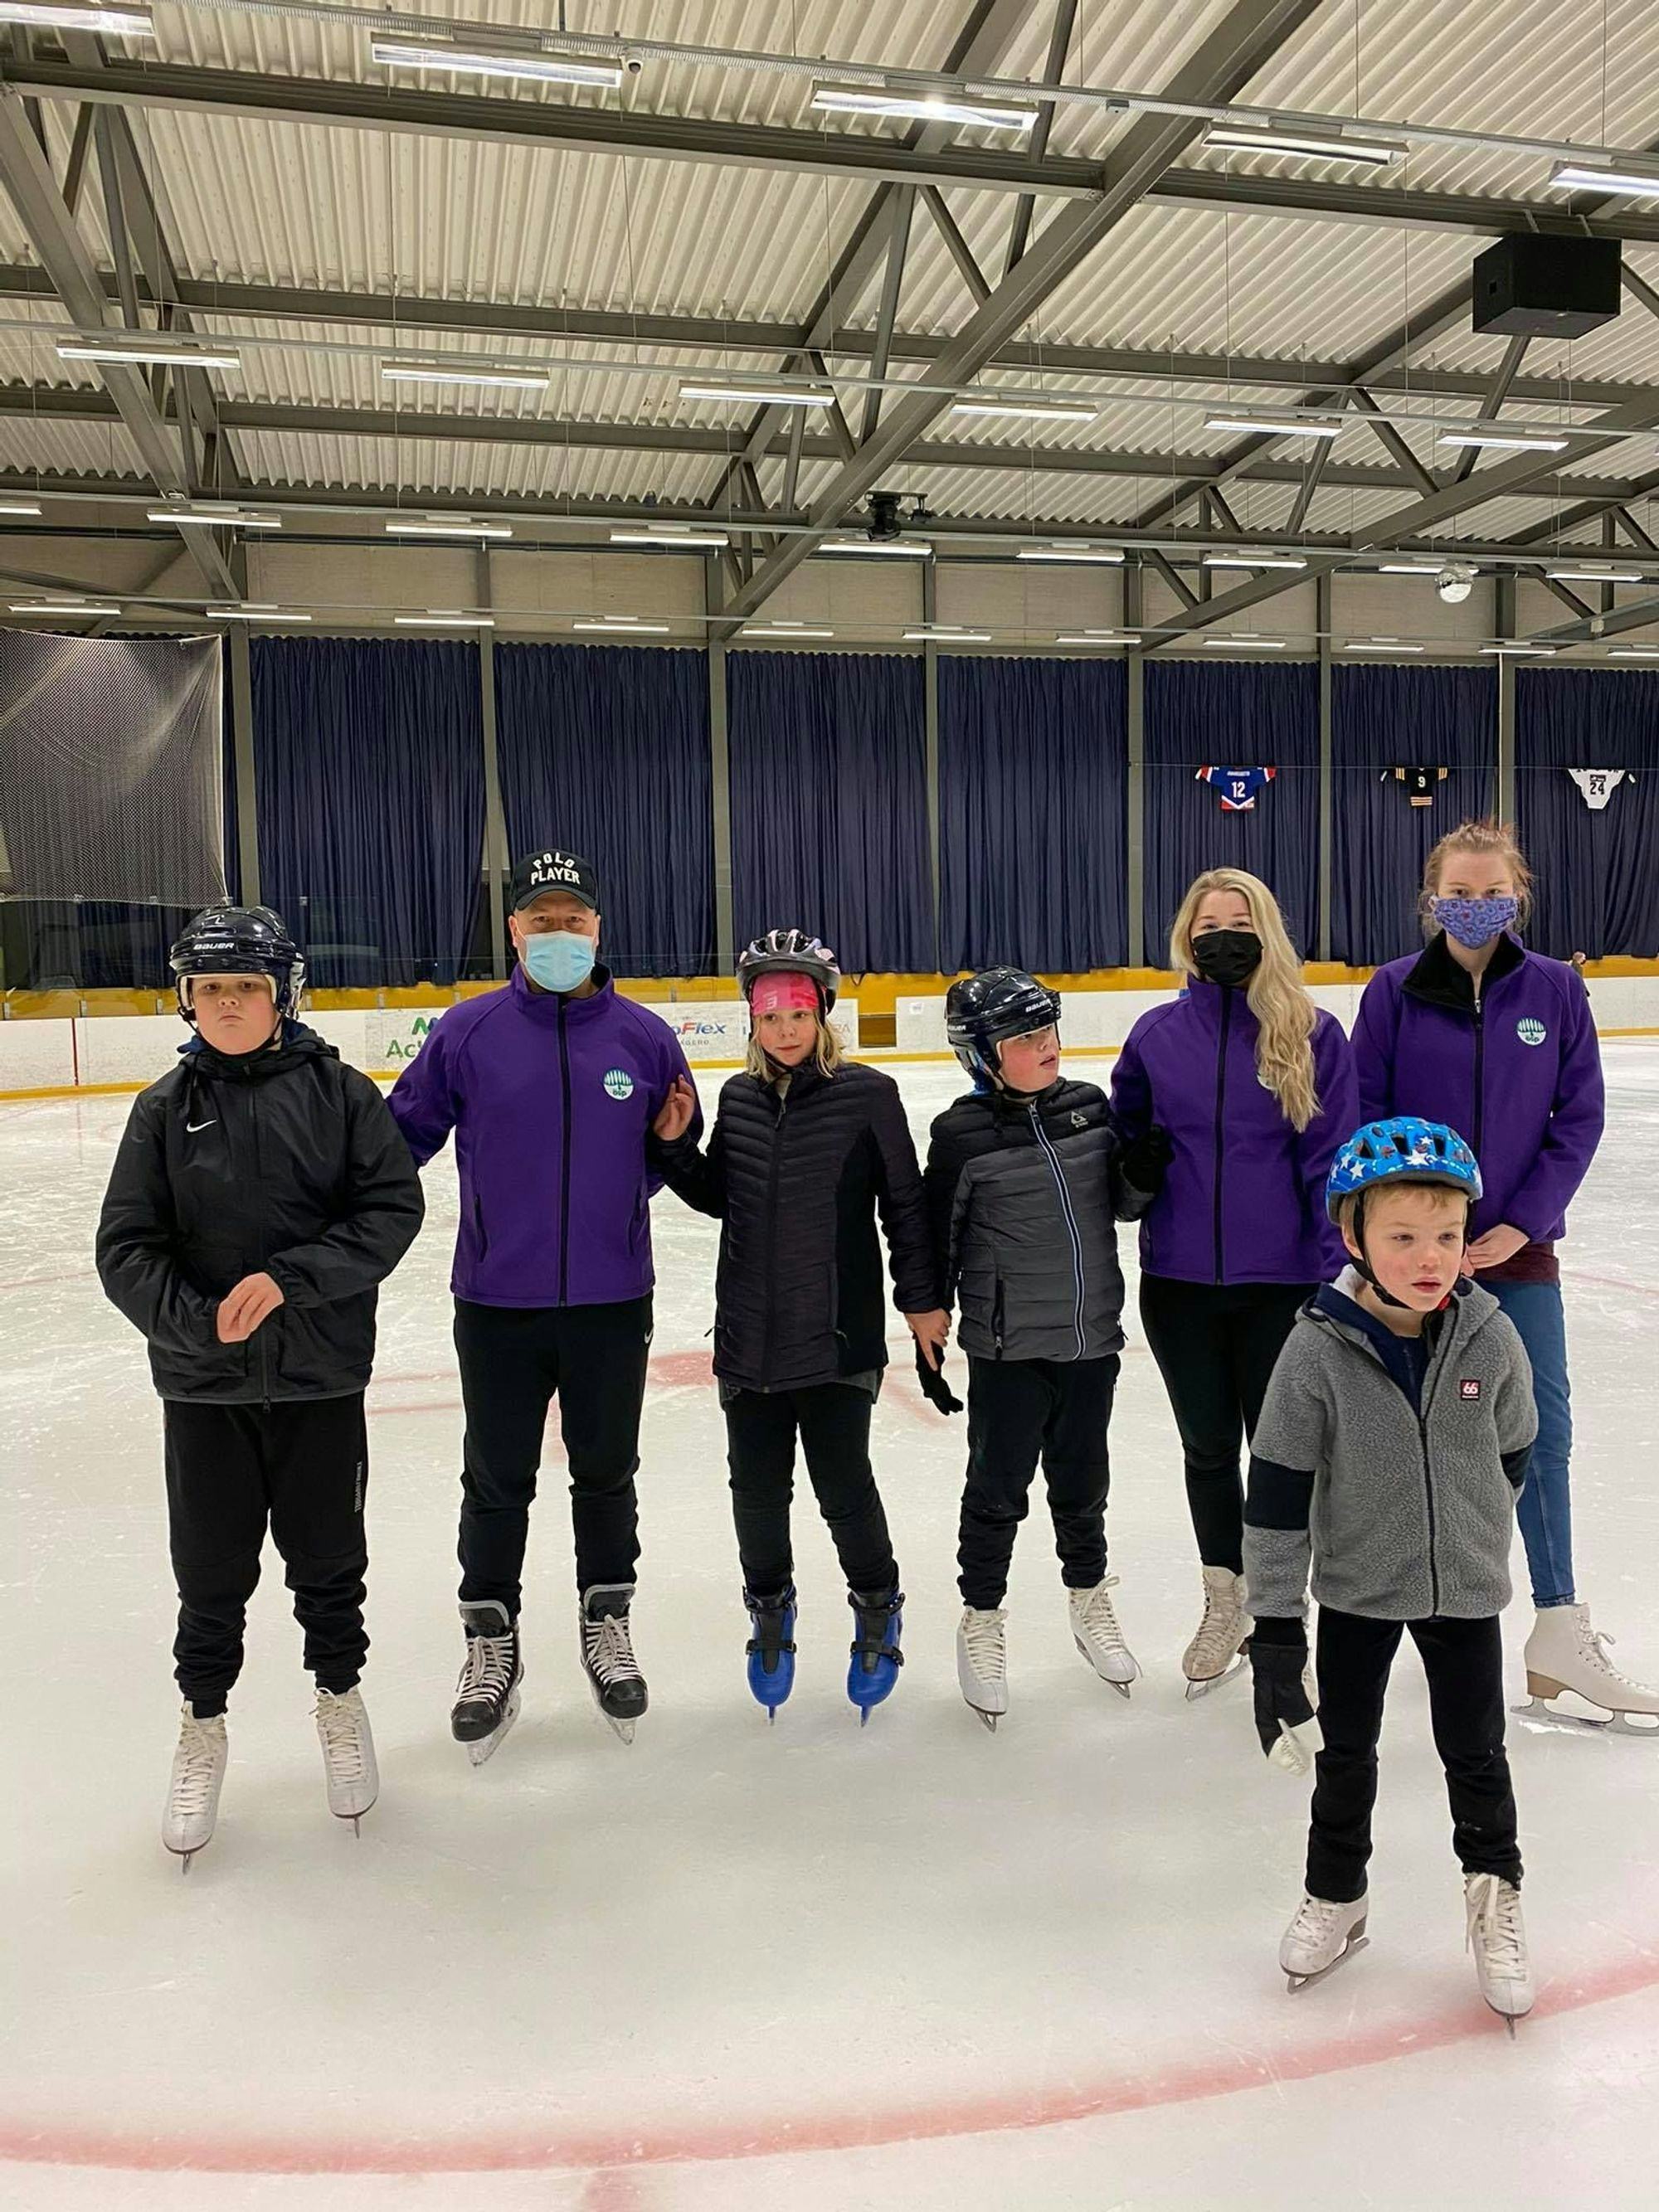 A group of people with protective gear and masks, standing on an indoor ice rink